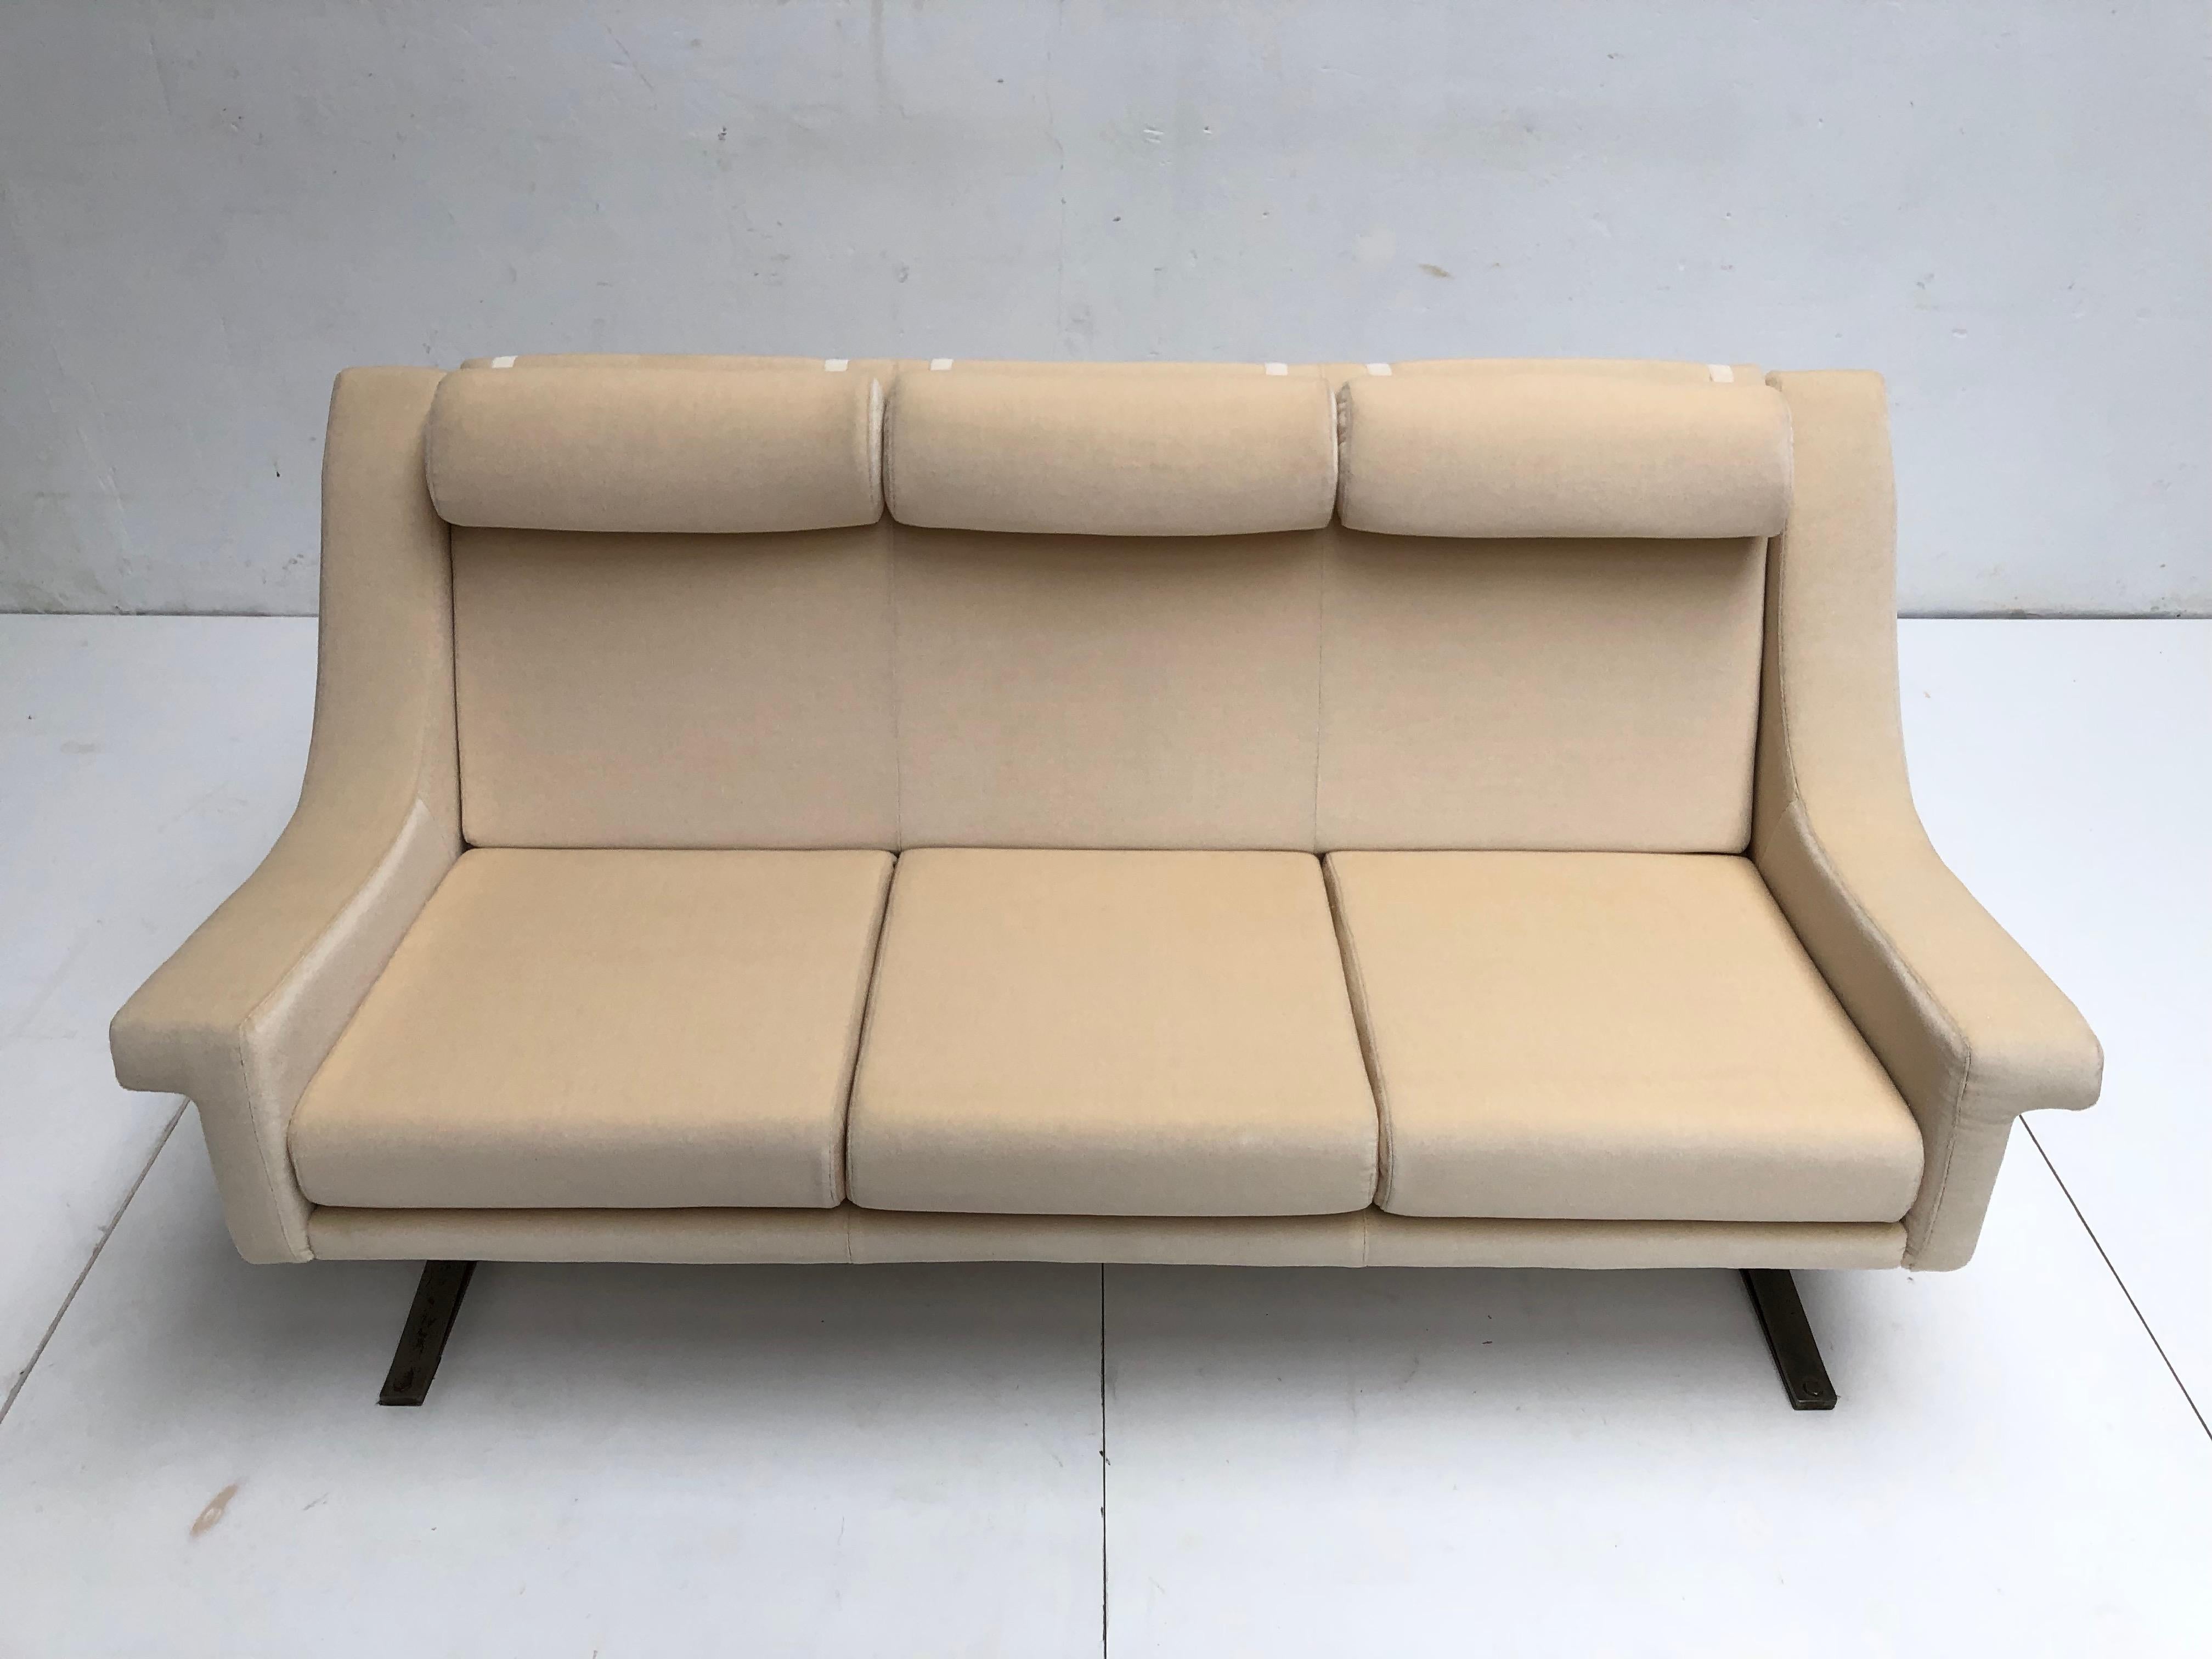 Enameled Superb 'Grand Prix' lounge chairs & sofa by Sculptor Maurice Calka, Arflex, 1960 For Sale